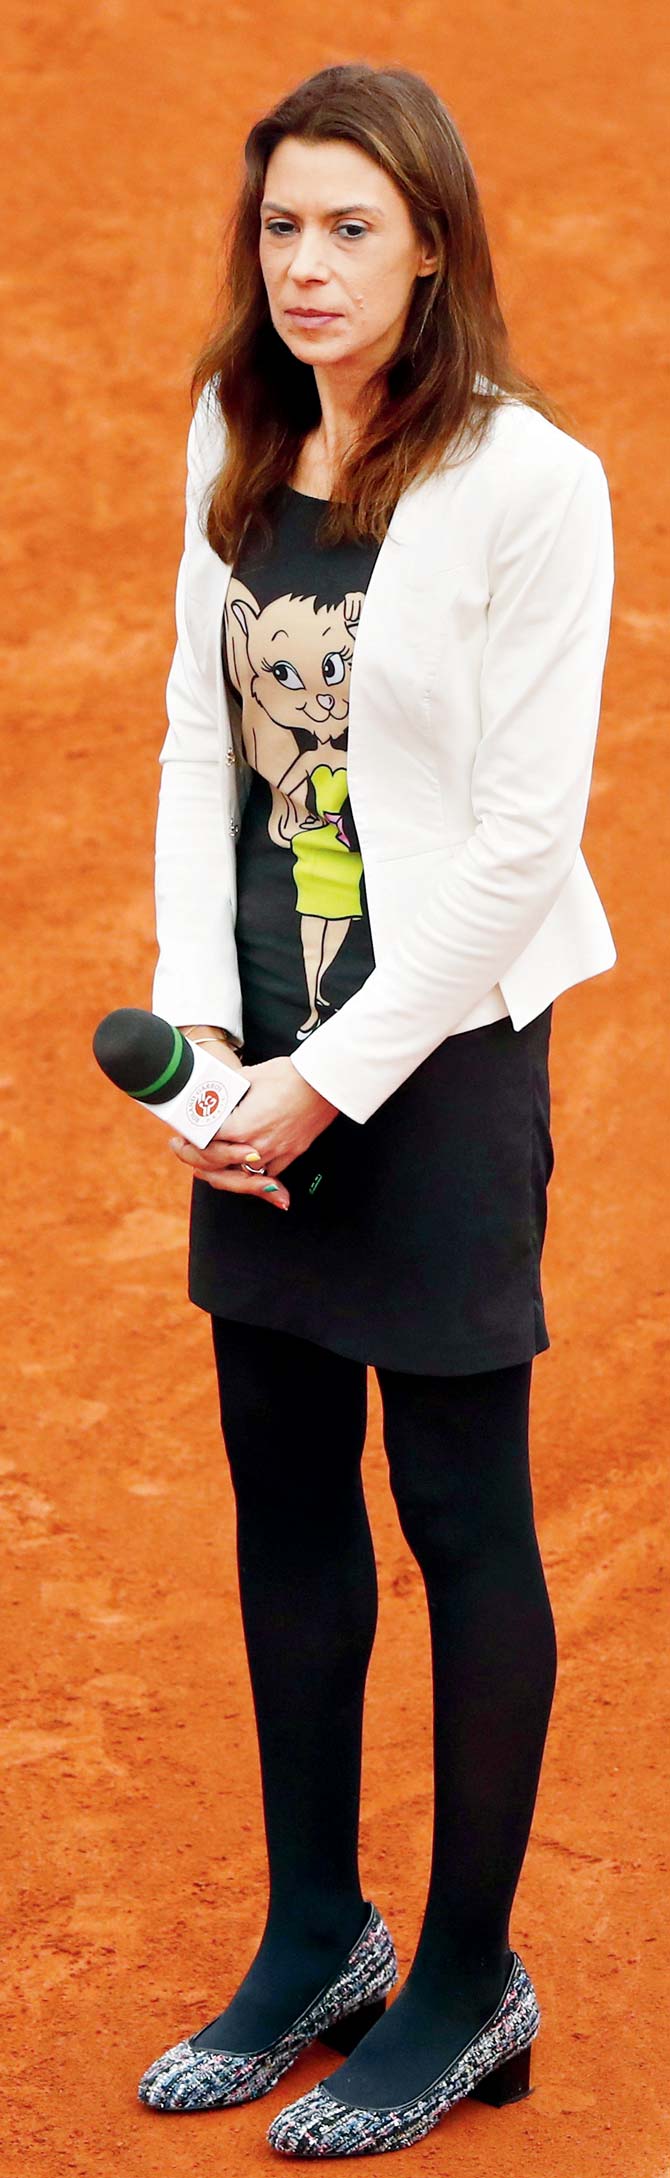 Marion Bartoli during commentary duty recently